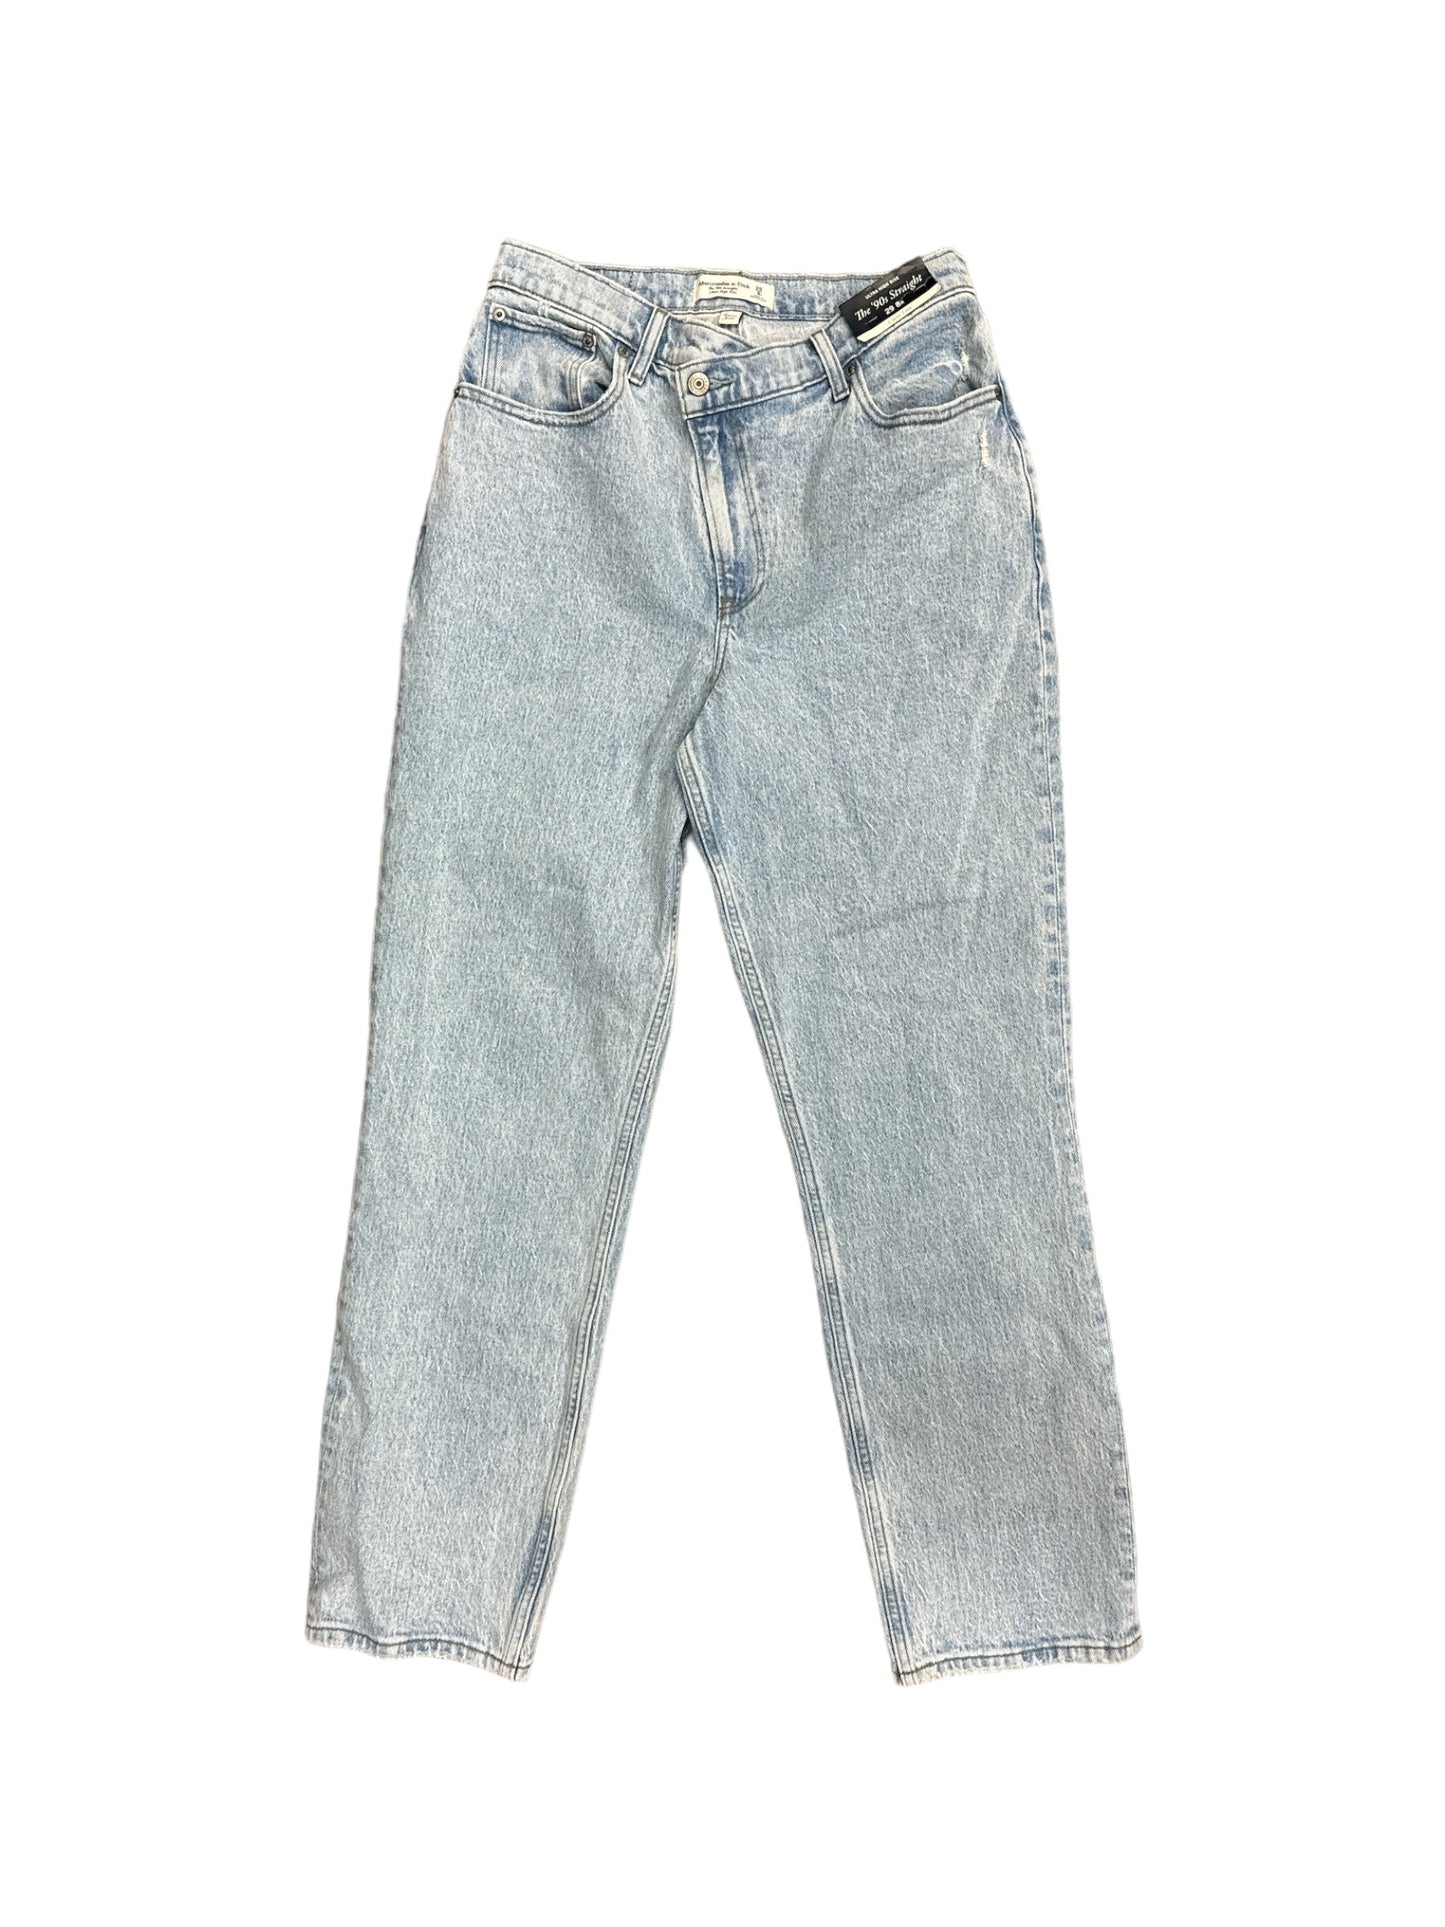 Blue Denim Jeans Straight Abercrombie And Fitch, Size 8